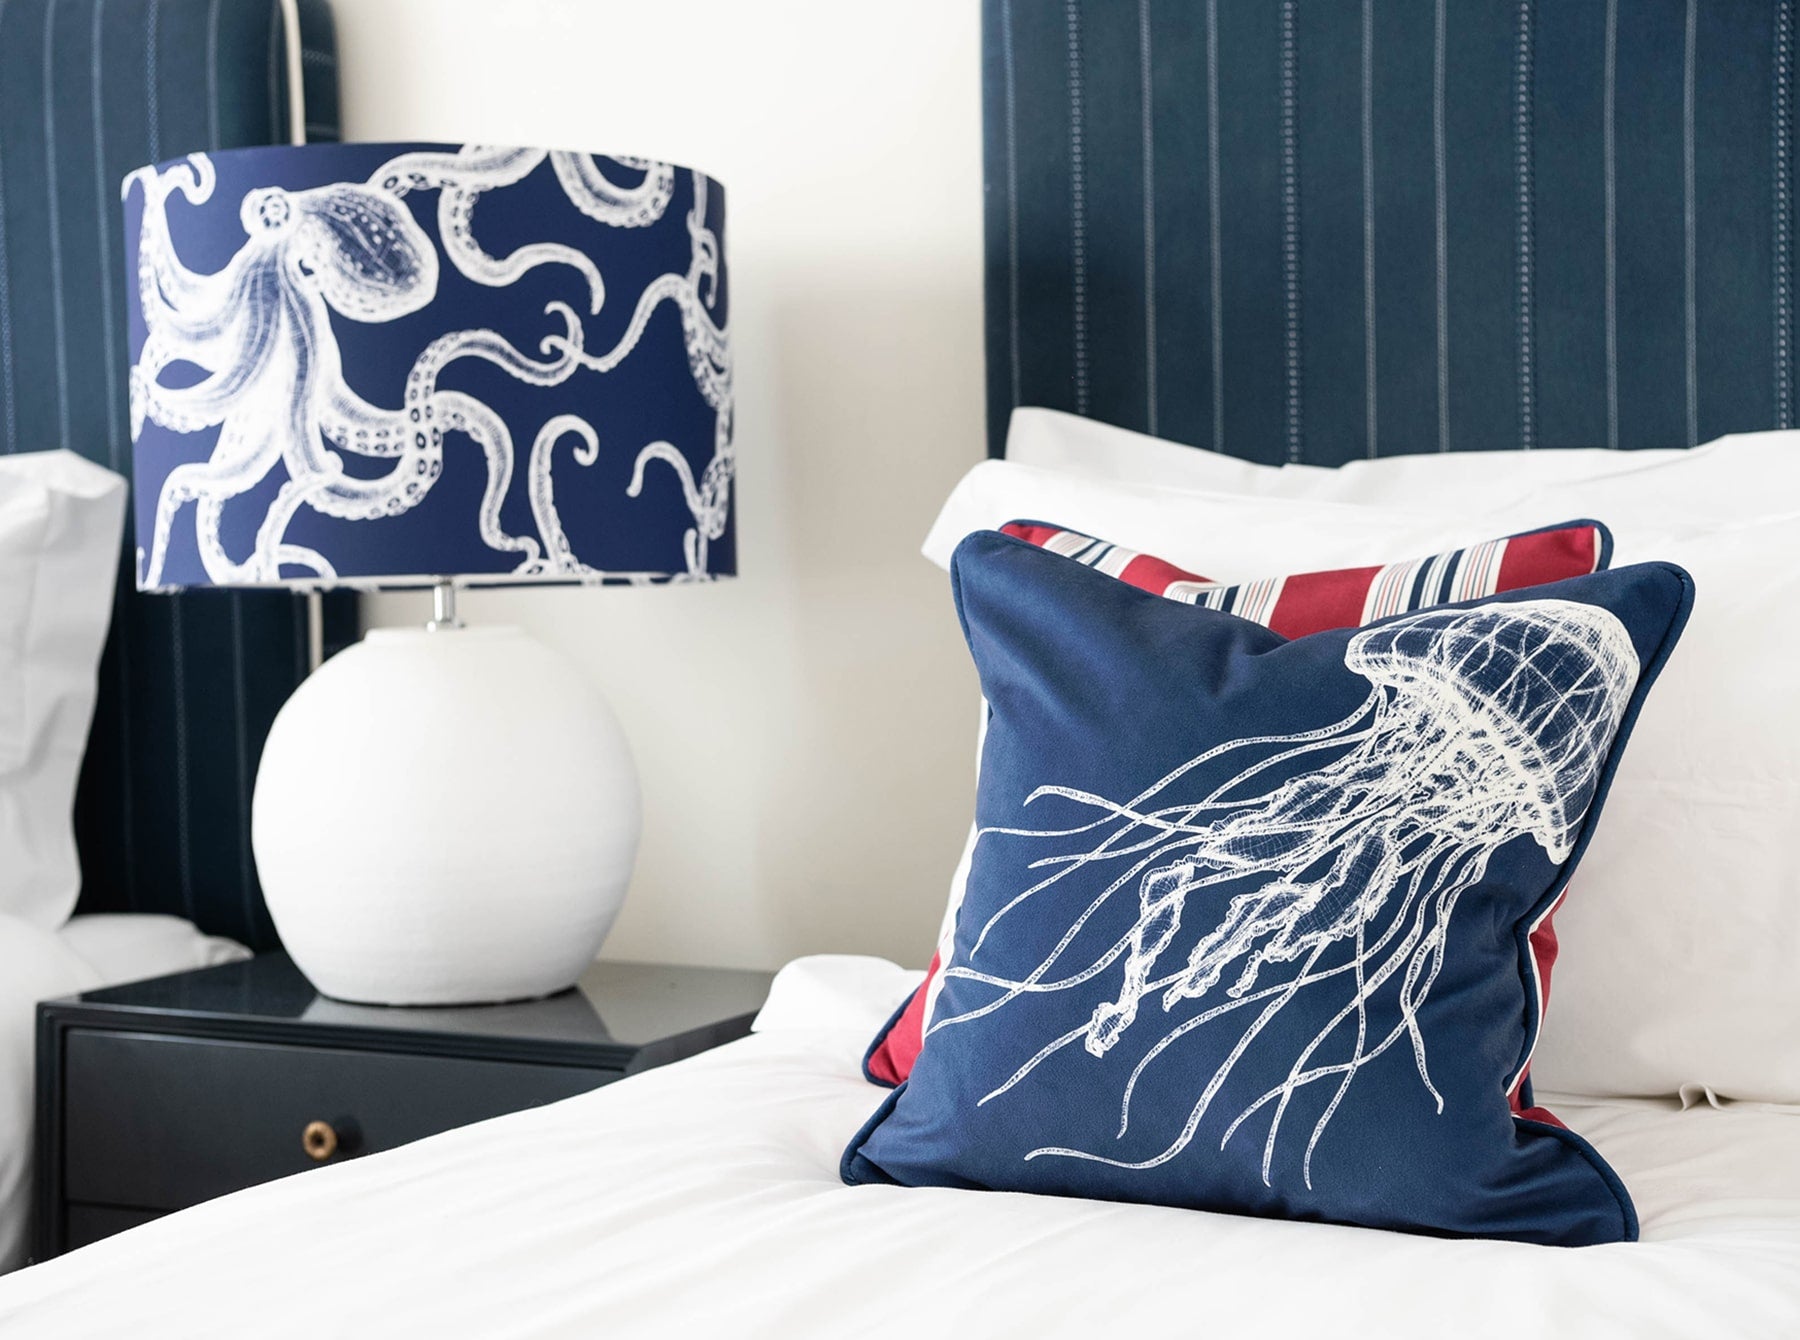 Our Classic Octopus White design on a Navy background on a White lampbase placed on a navy bedside table in between two single beds. One of the beds have our classic designs placed on.